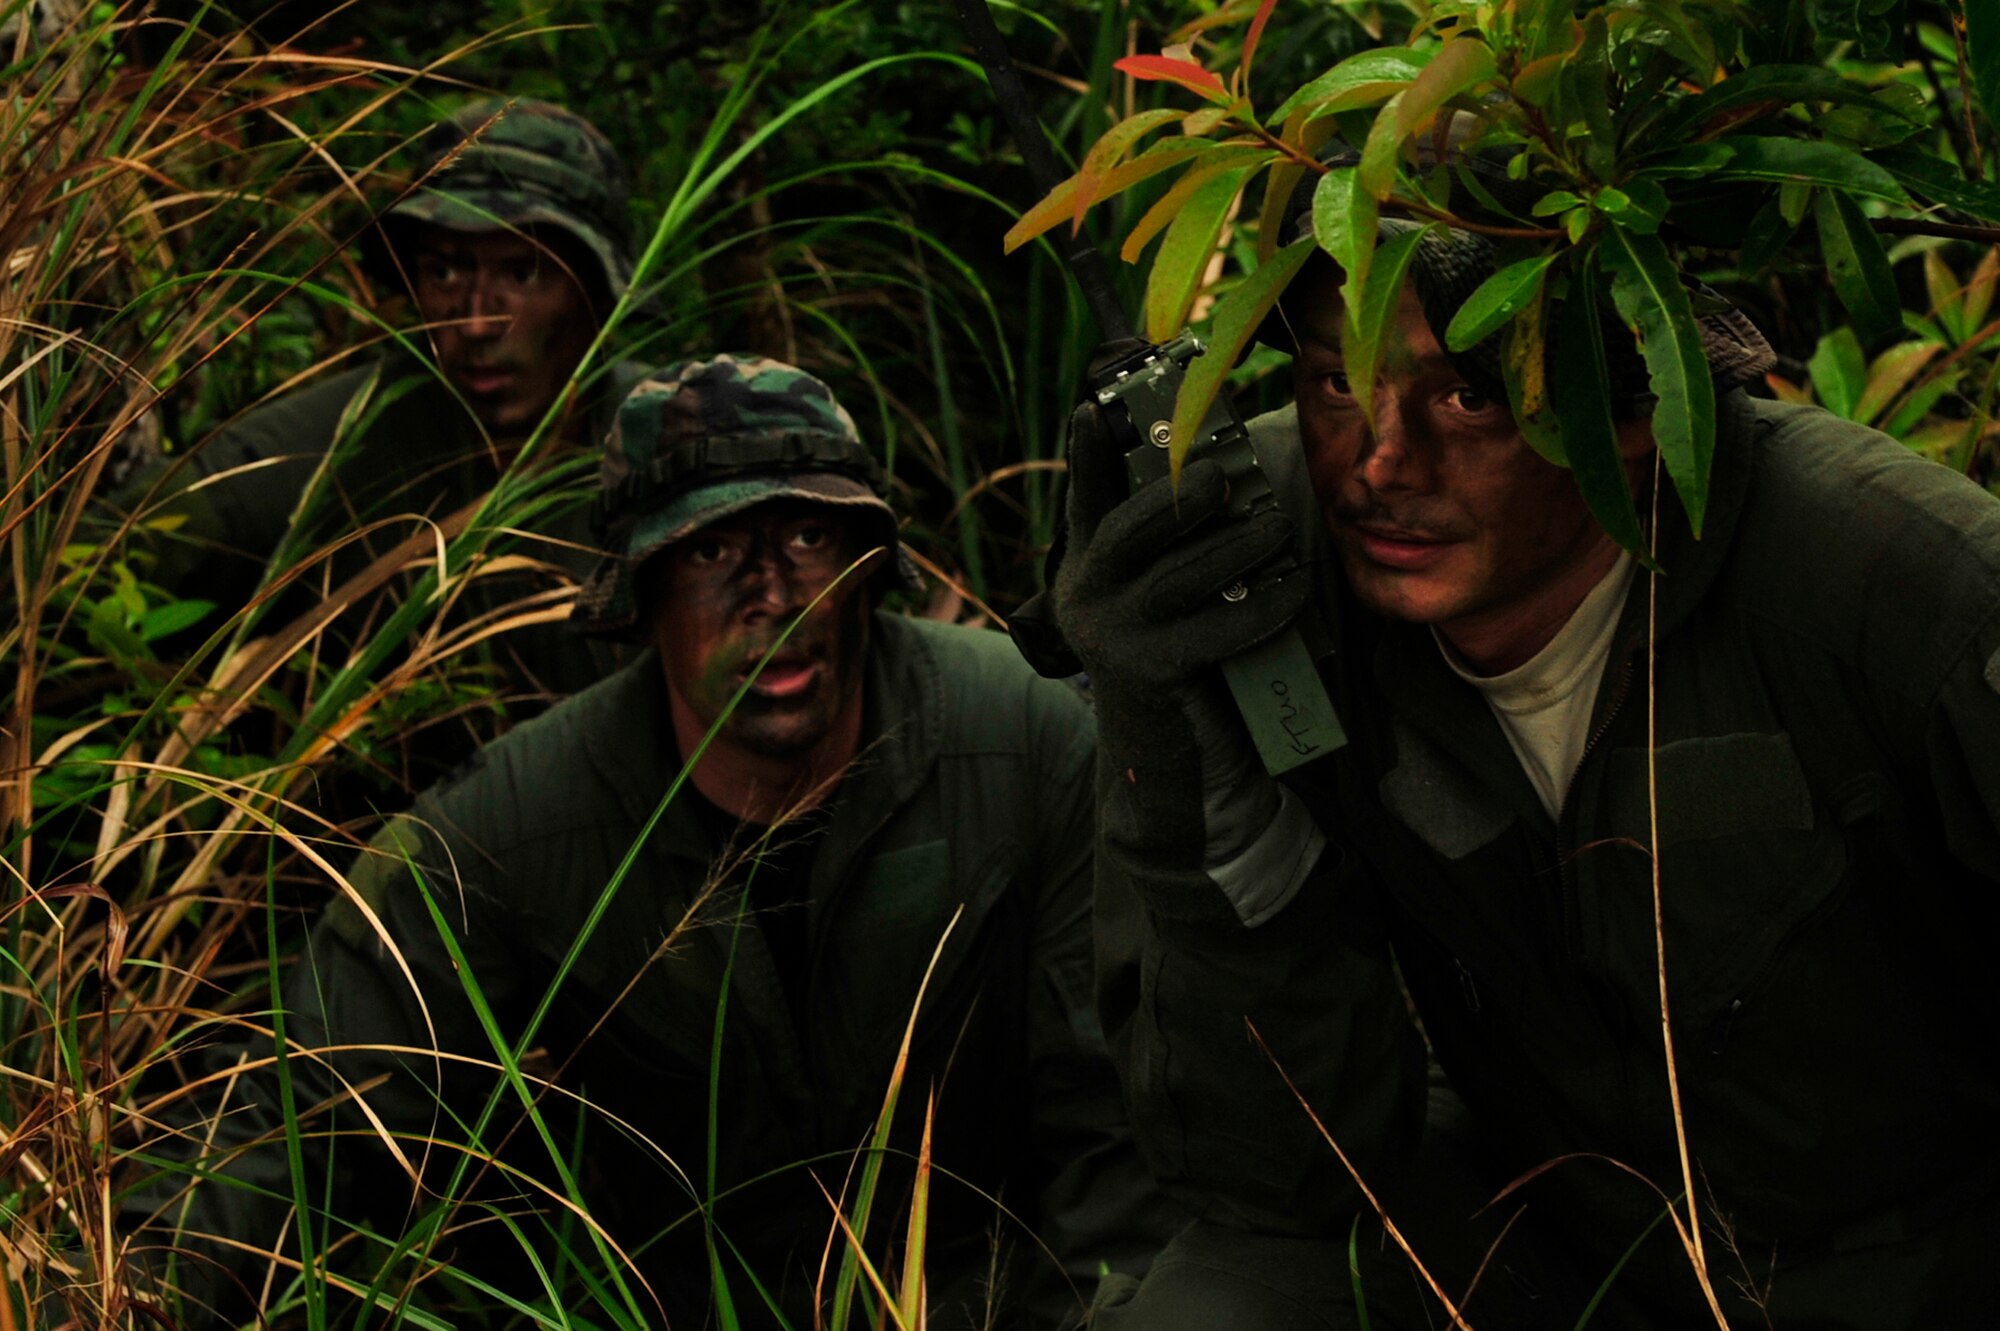 1st Lt. Joseph Bisson (left) and Capt. Aaron Wallace (middle), pilots from the 909th Air Refueling Squadron, and Tech. Sgt. Michael Ingram (right), a 909th ARS boom operator, make contact with rescue personnel while taking cover during an evasion scenario after a simulated KC-135 crash at Kadena Air Base, Japan, March 25. Members of the 909th ARS spent the afternoon training proper survival and evasion procedures. The training was part of Beverly High 10-02, a Local Operational Readiness Exercise designed to evaluate the readiness of Kadena Airmen. (U.S. Air Force photo/Senior Airman Amanda N. Grabiec)